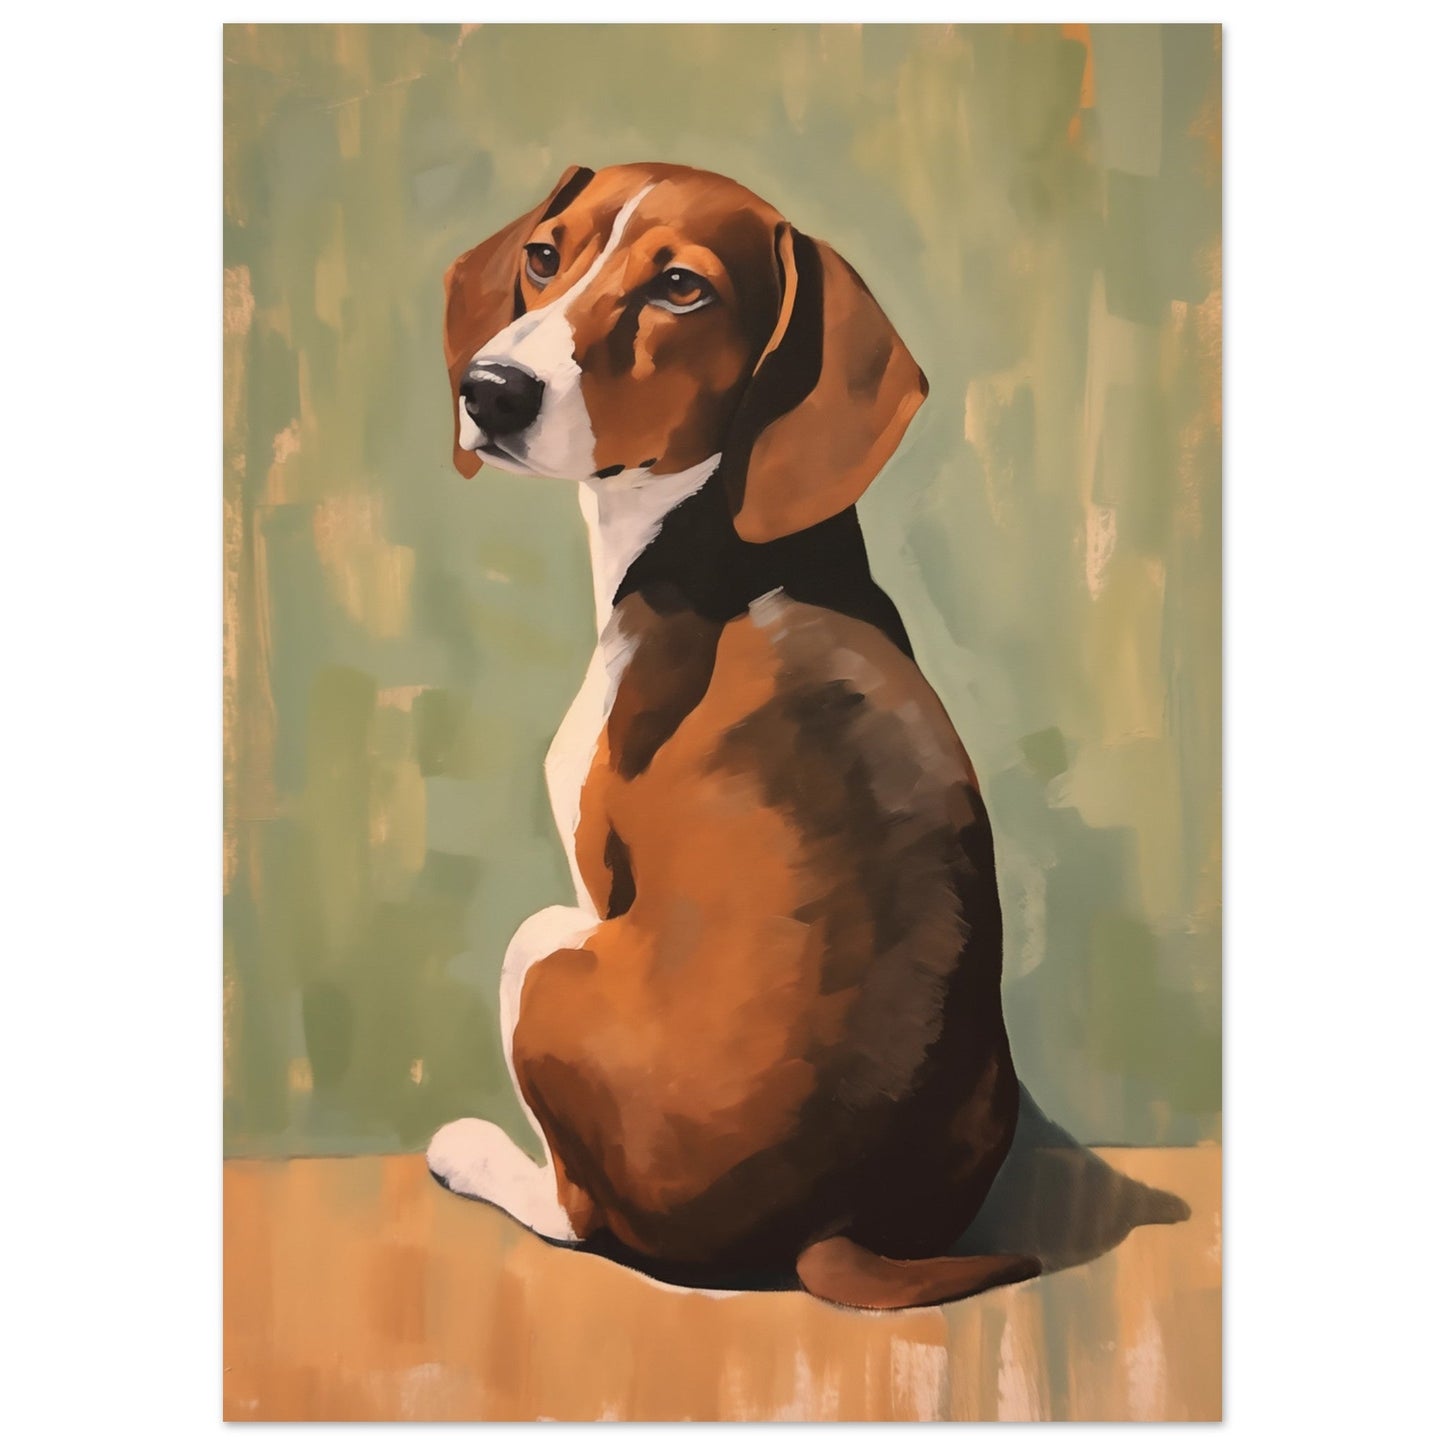 A Beagle Musing captured in a captivating wall art.